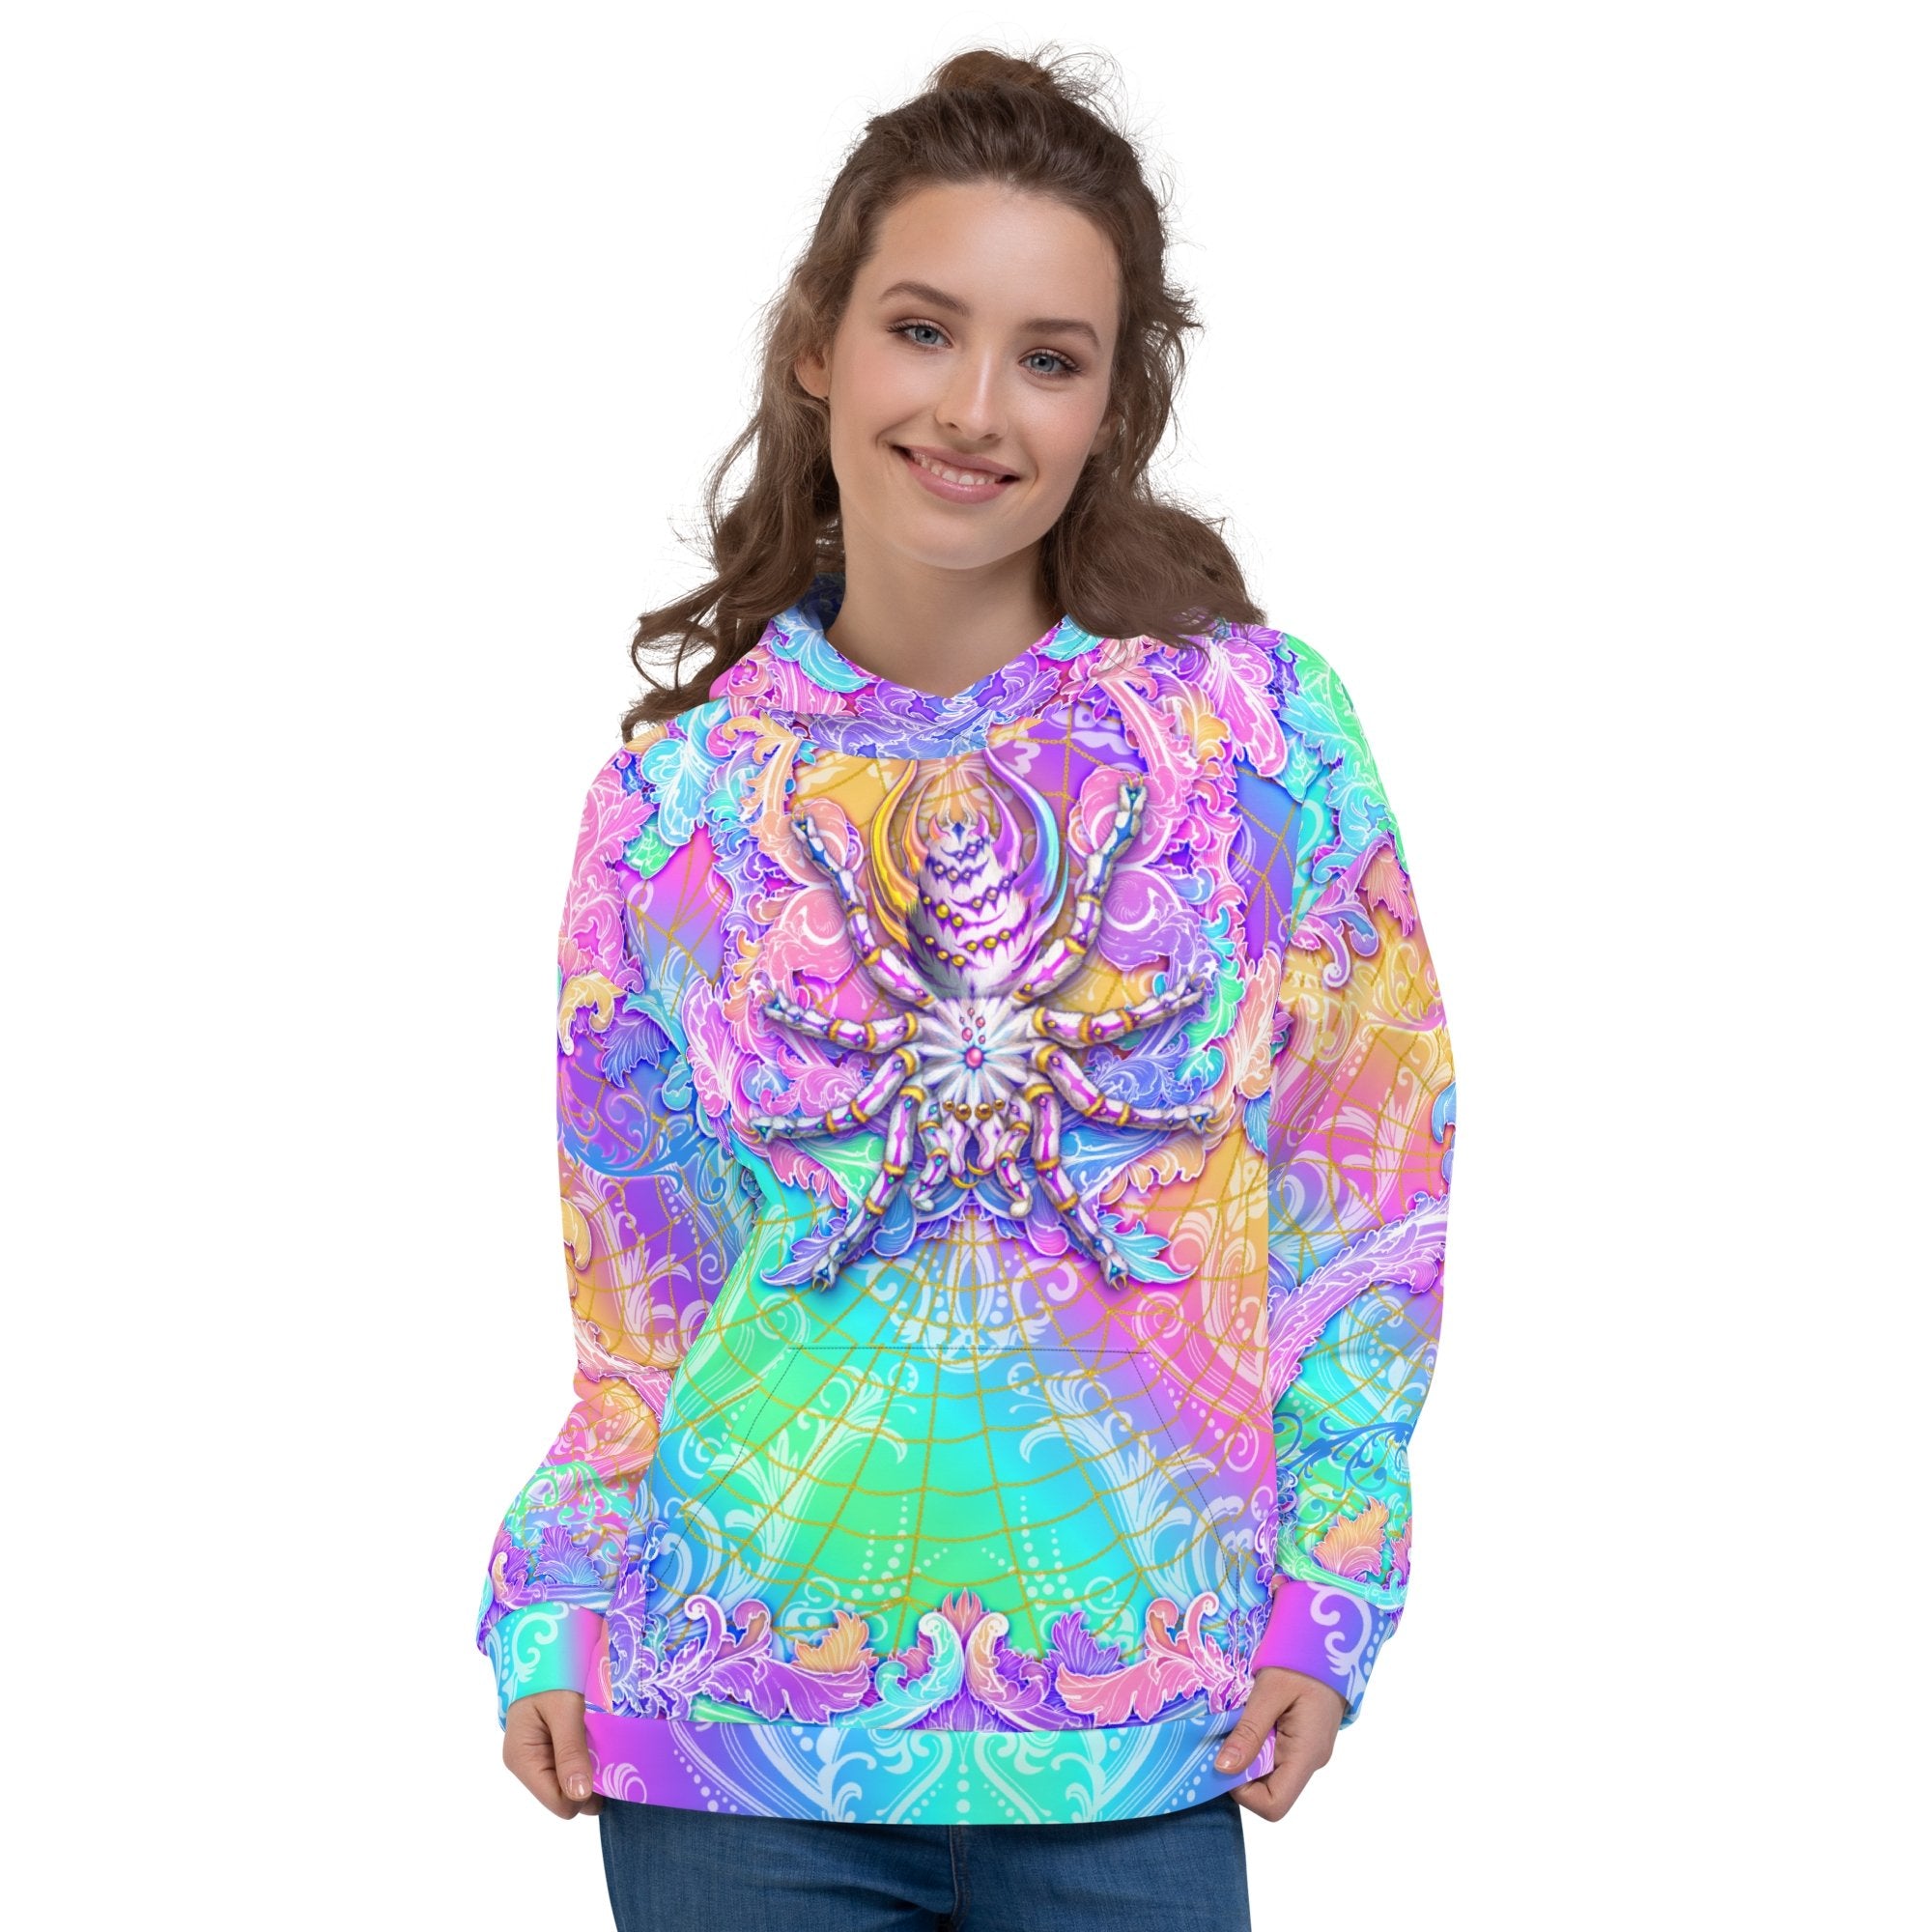 Pastel Hoodie, Aesthetic Streetwear, Skater, Rave Outfit, Festival Apparel, Holographic Clothing, Unisex - Tarantula, Spider, Psychedelic Art - Abysm Internal